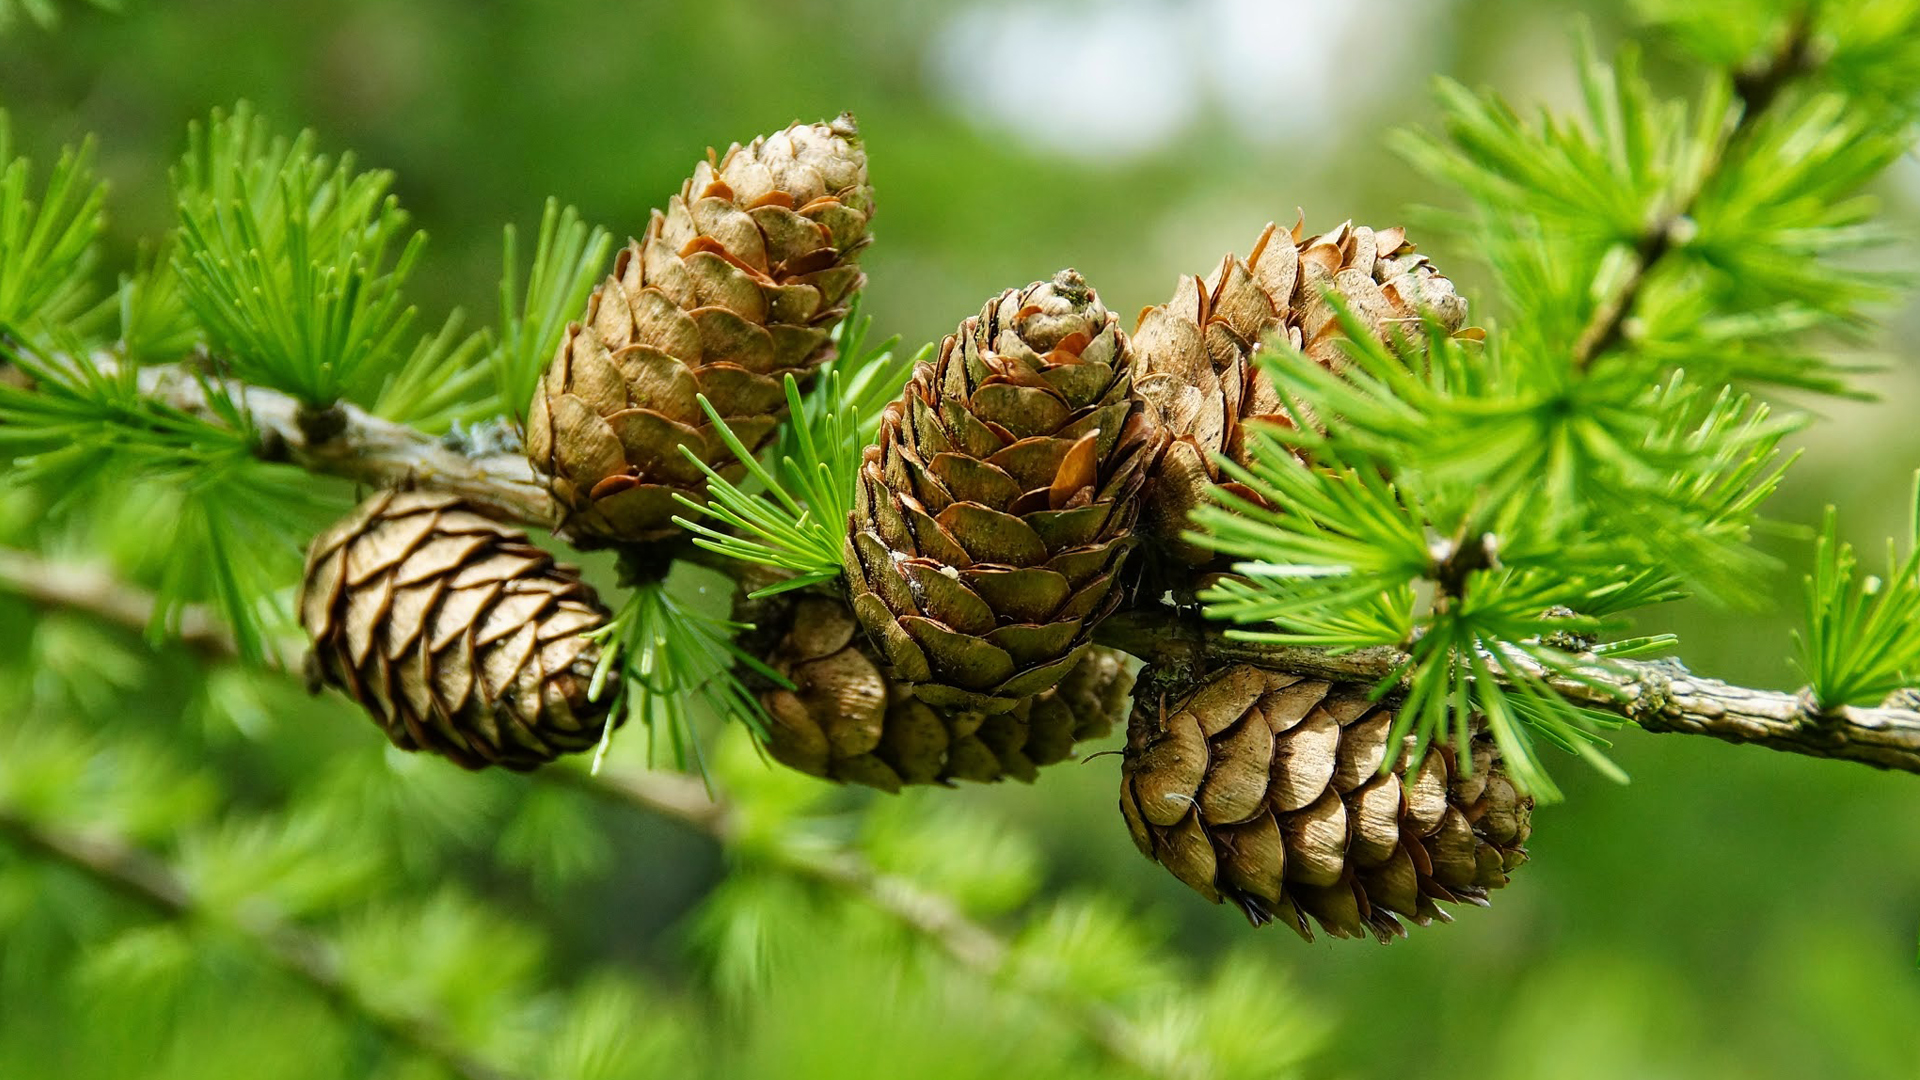 Free download Pine Cone Wallpaper and Background Image stmednet